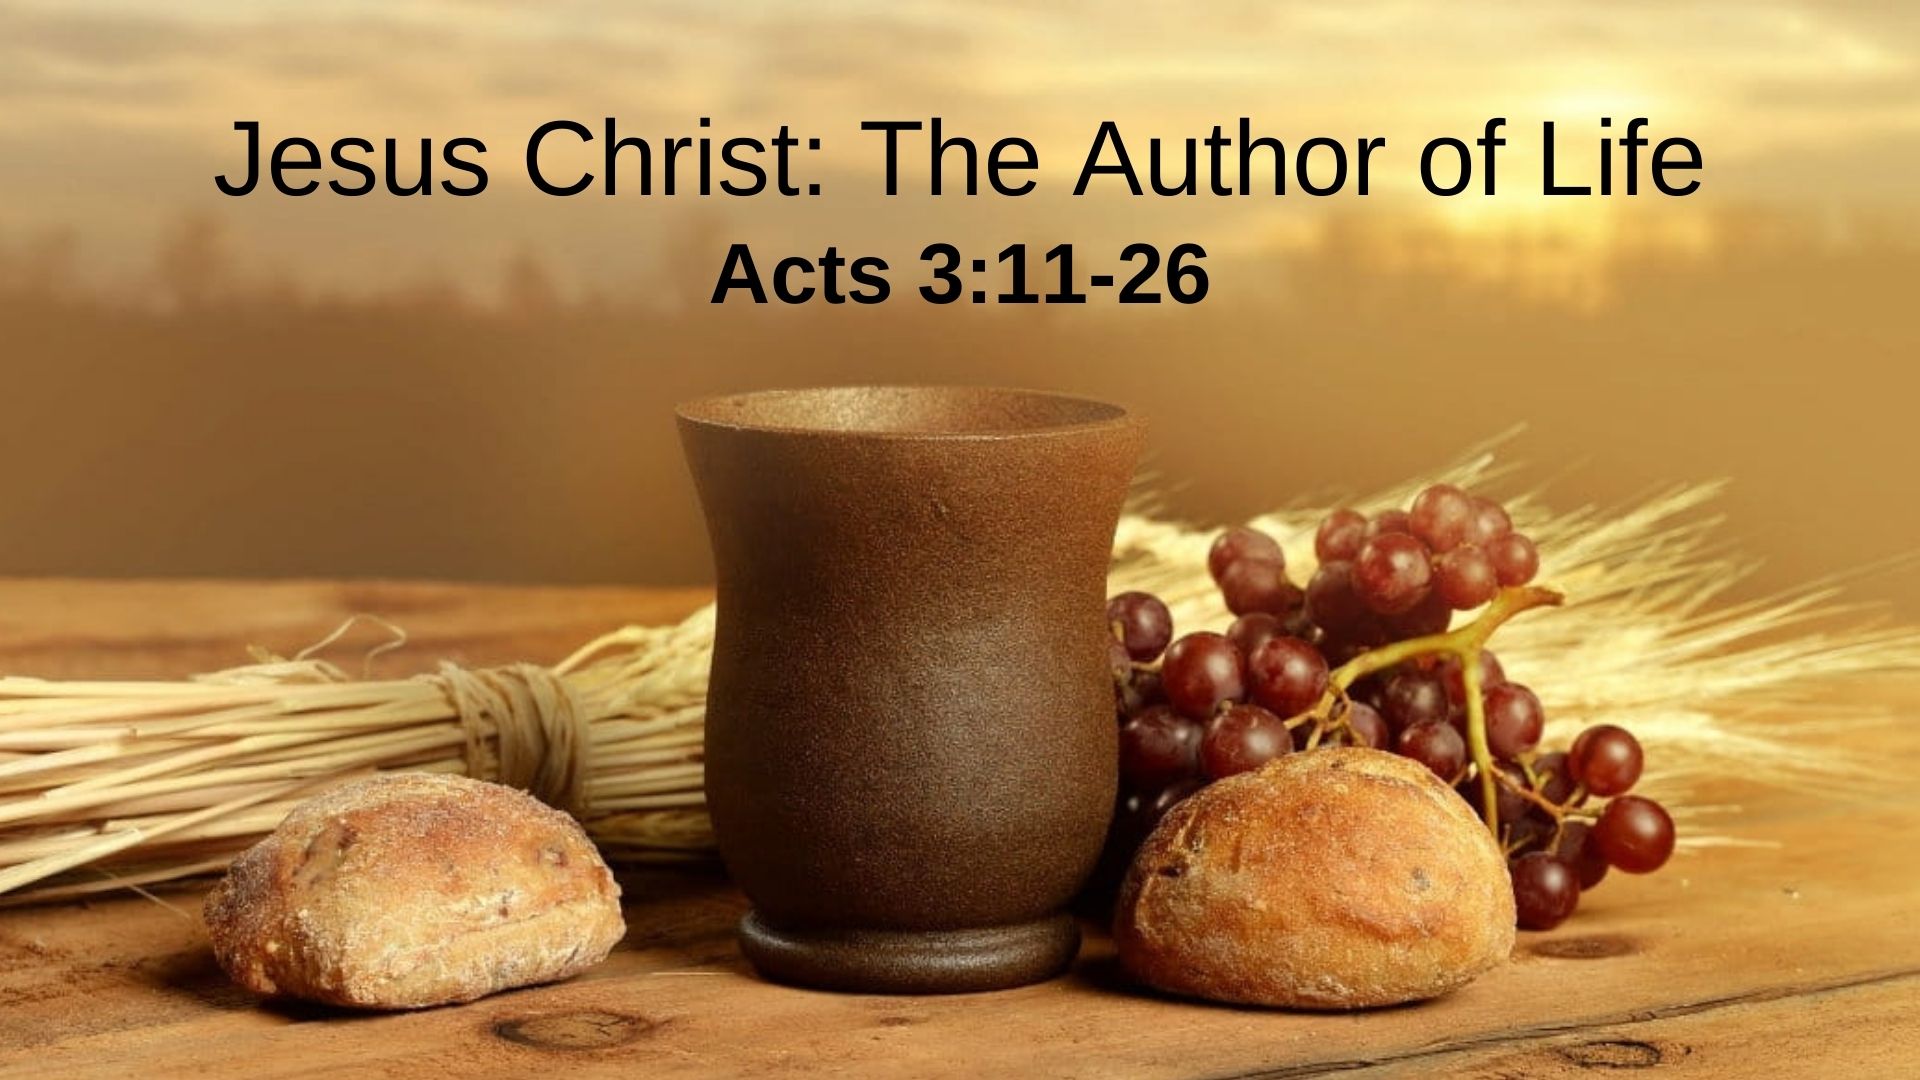 Jesus Christ: The Author of Life (Acts 3:11-26) Image